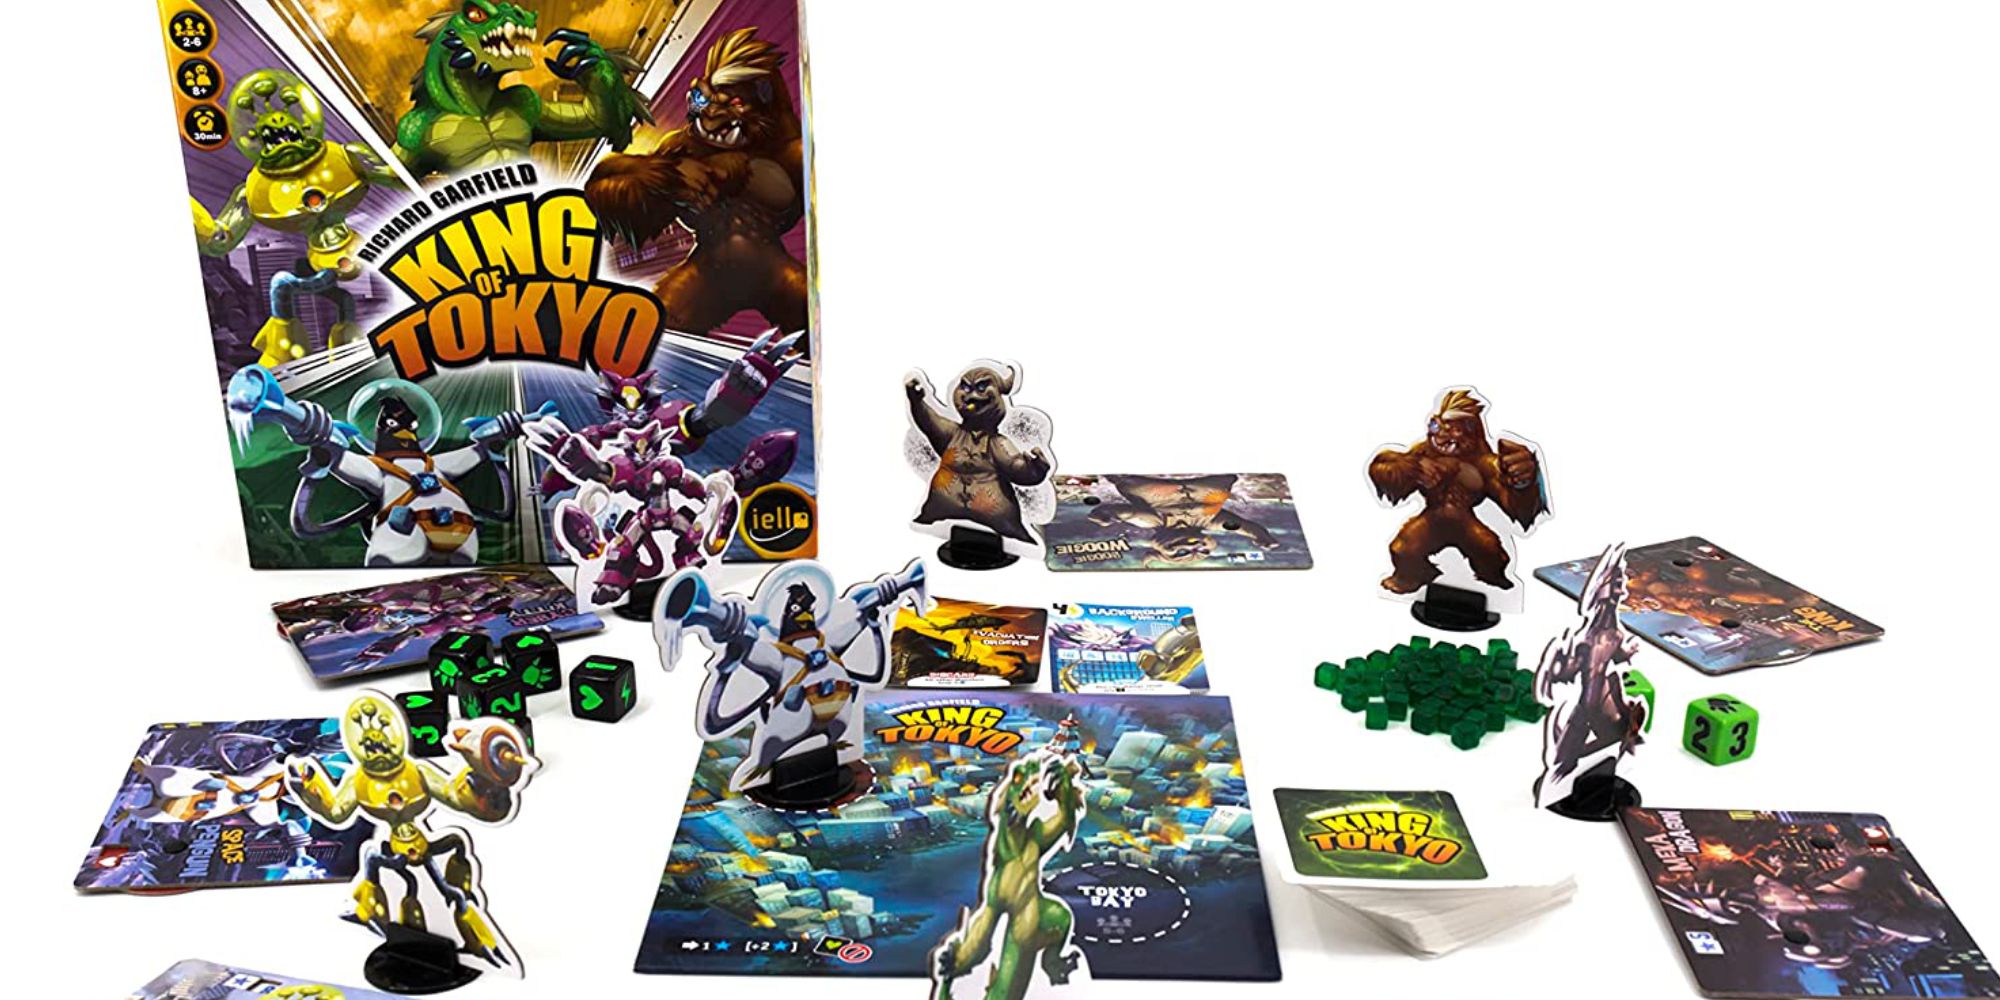 King of Tokyo Board Game and pieces on a plain background